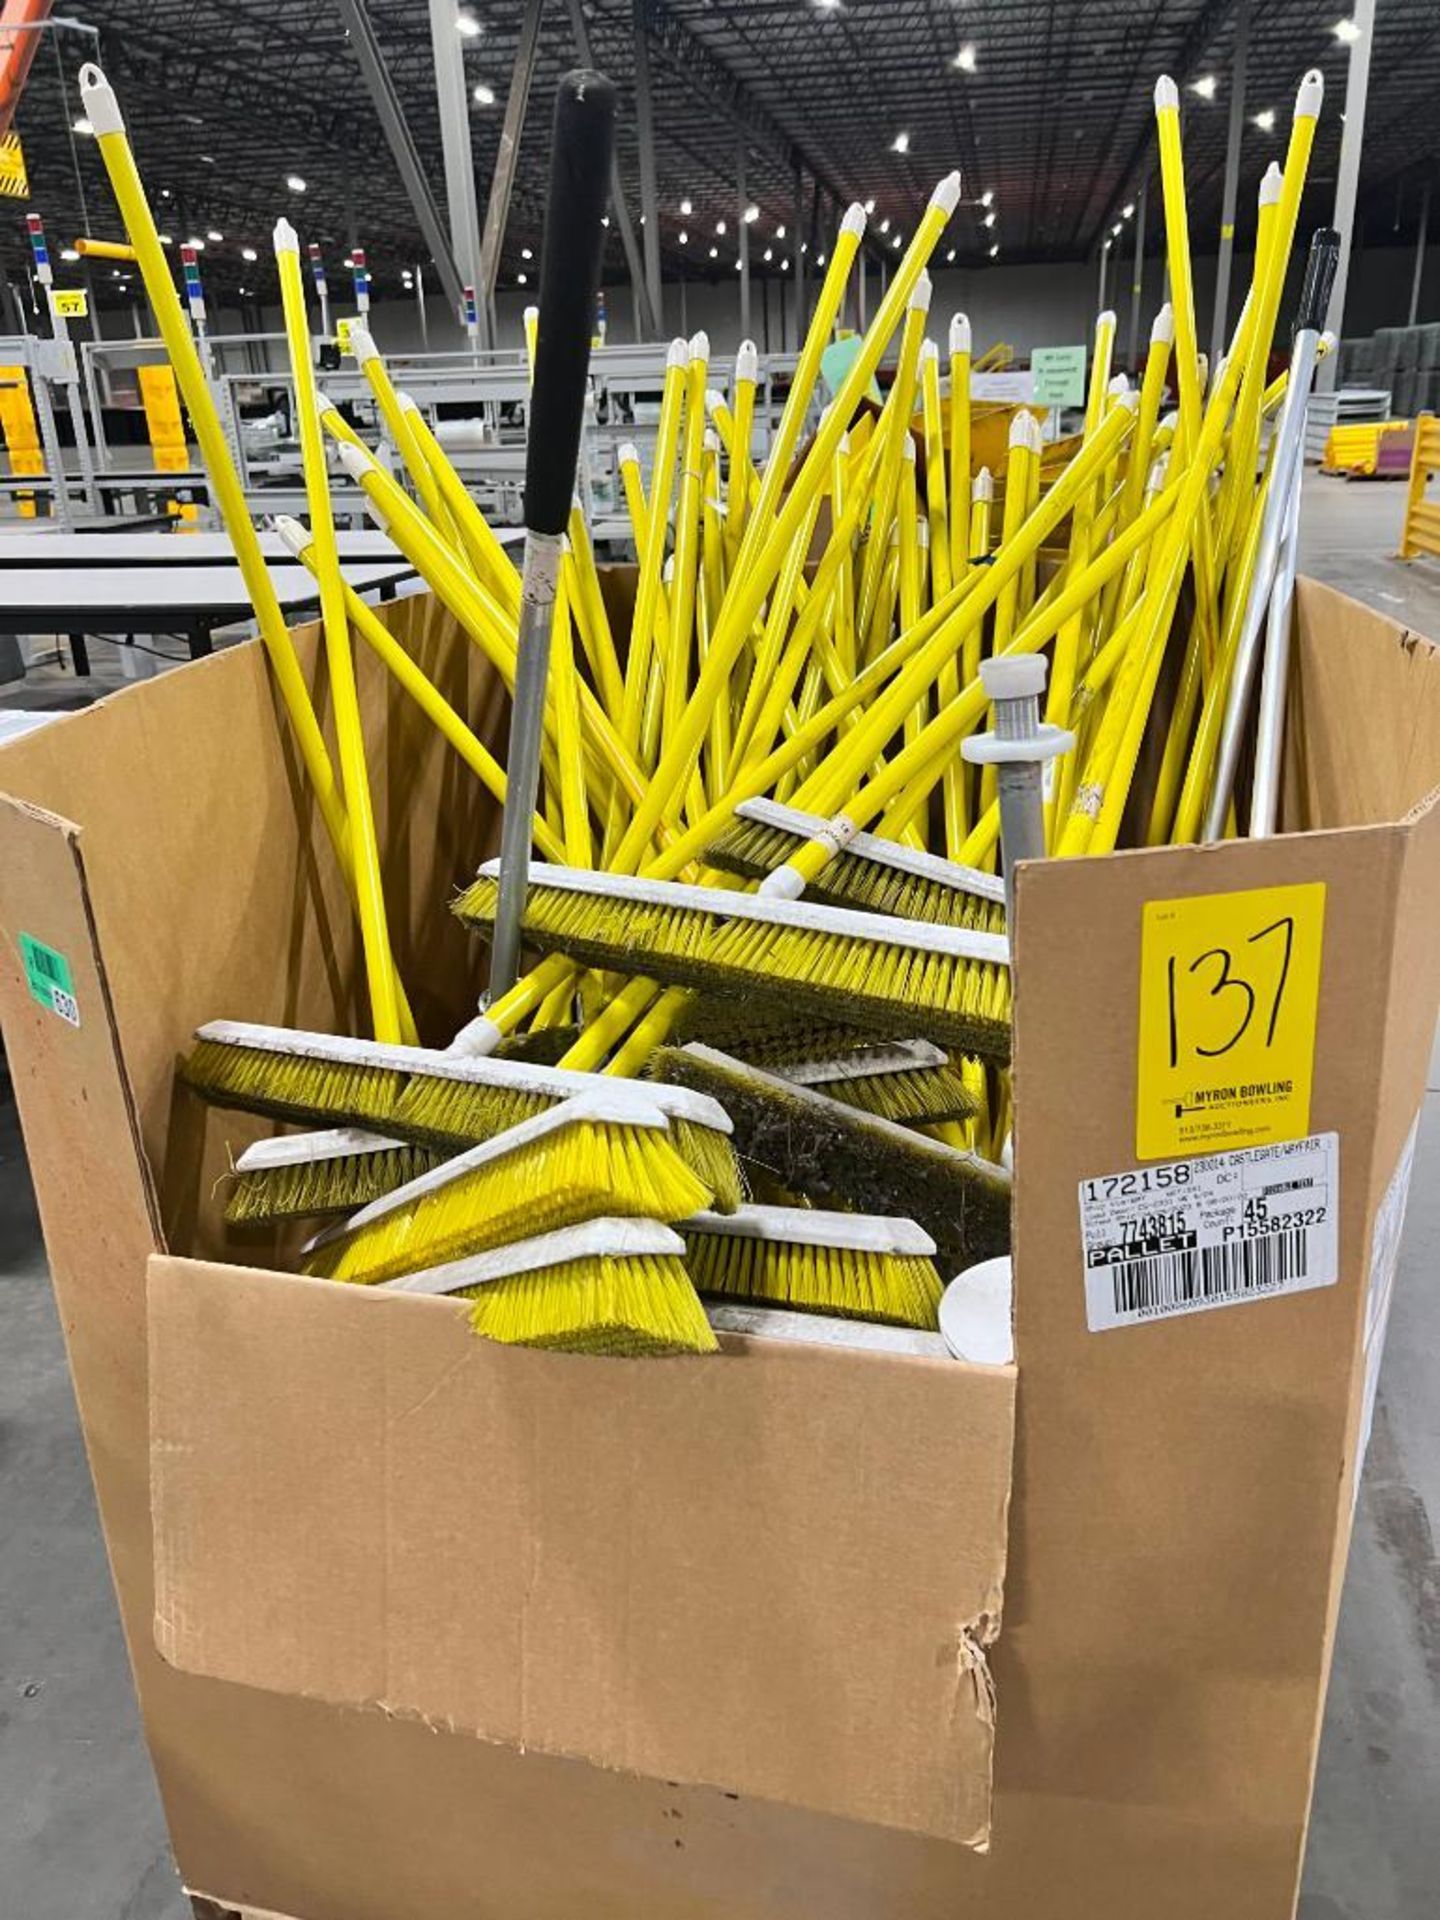 Box of Brooms ($20 Loading Fee Will Be Added To Invoice)